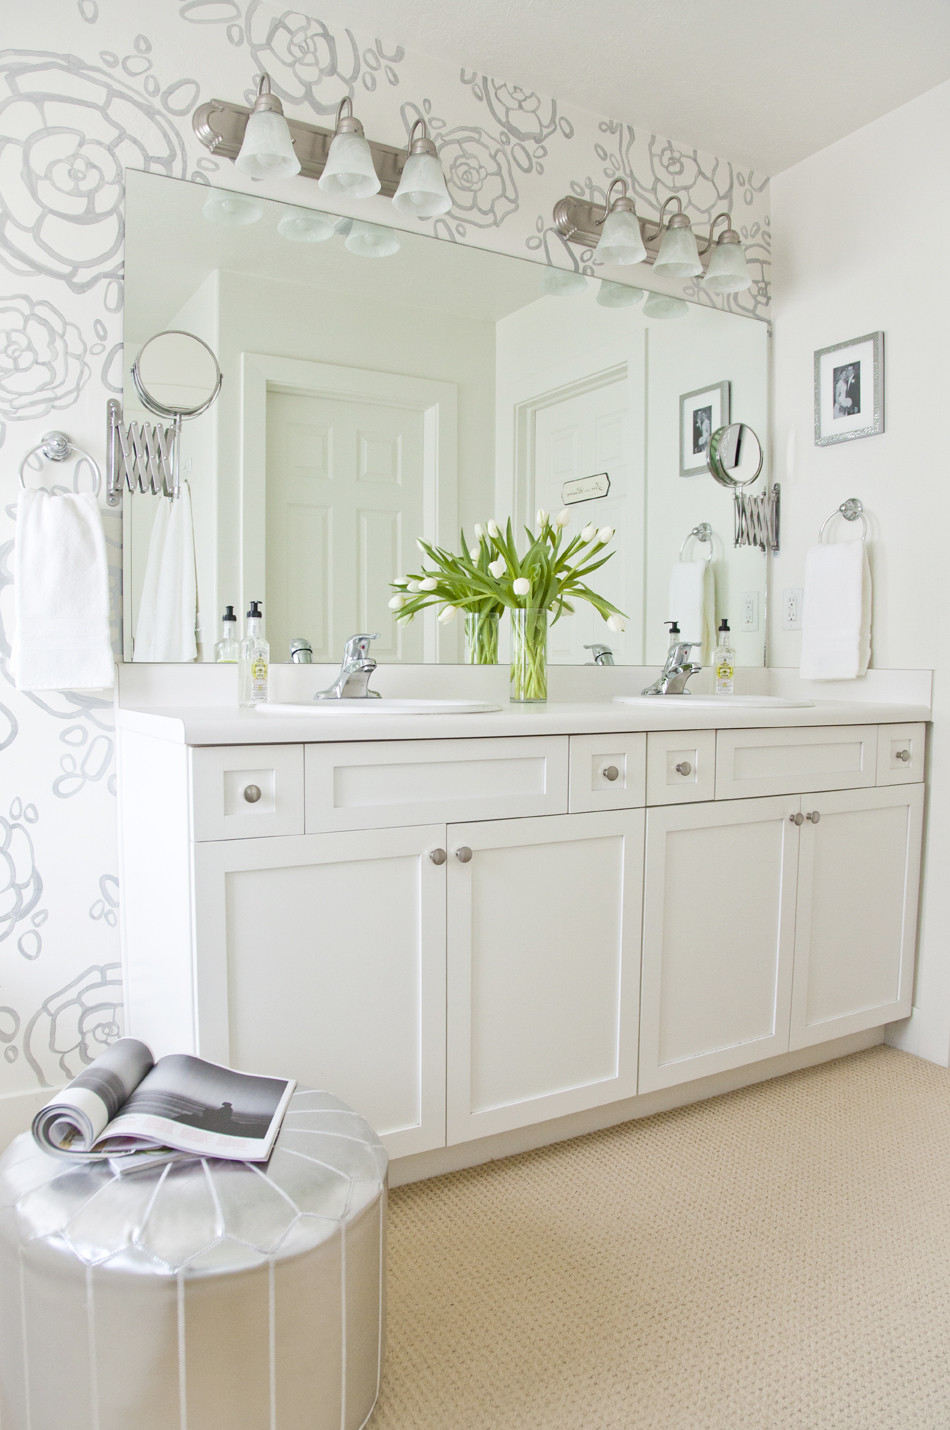 Mirrors Over Bathroom Sinks
 Boxwood Clippings Blog Archive Our Master Bath Reveal